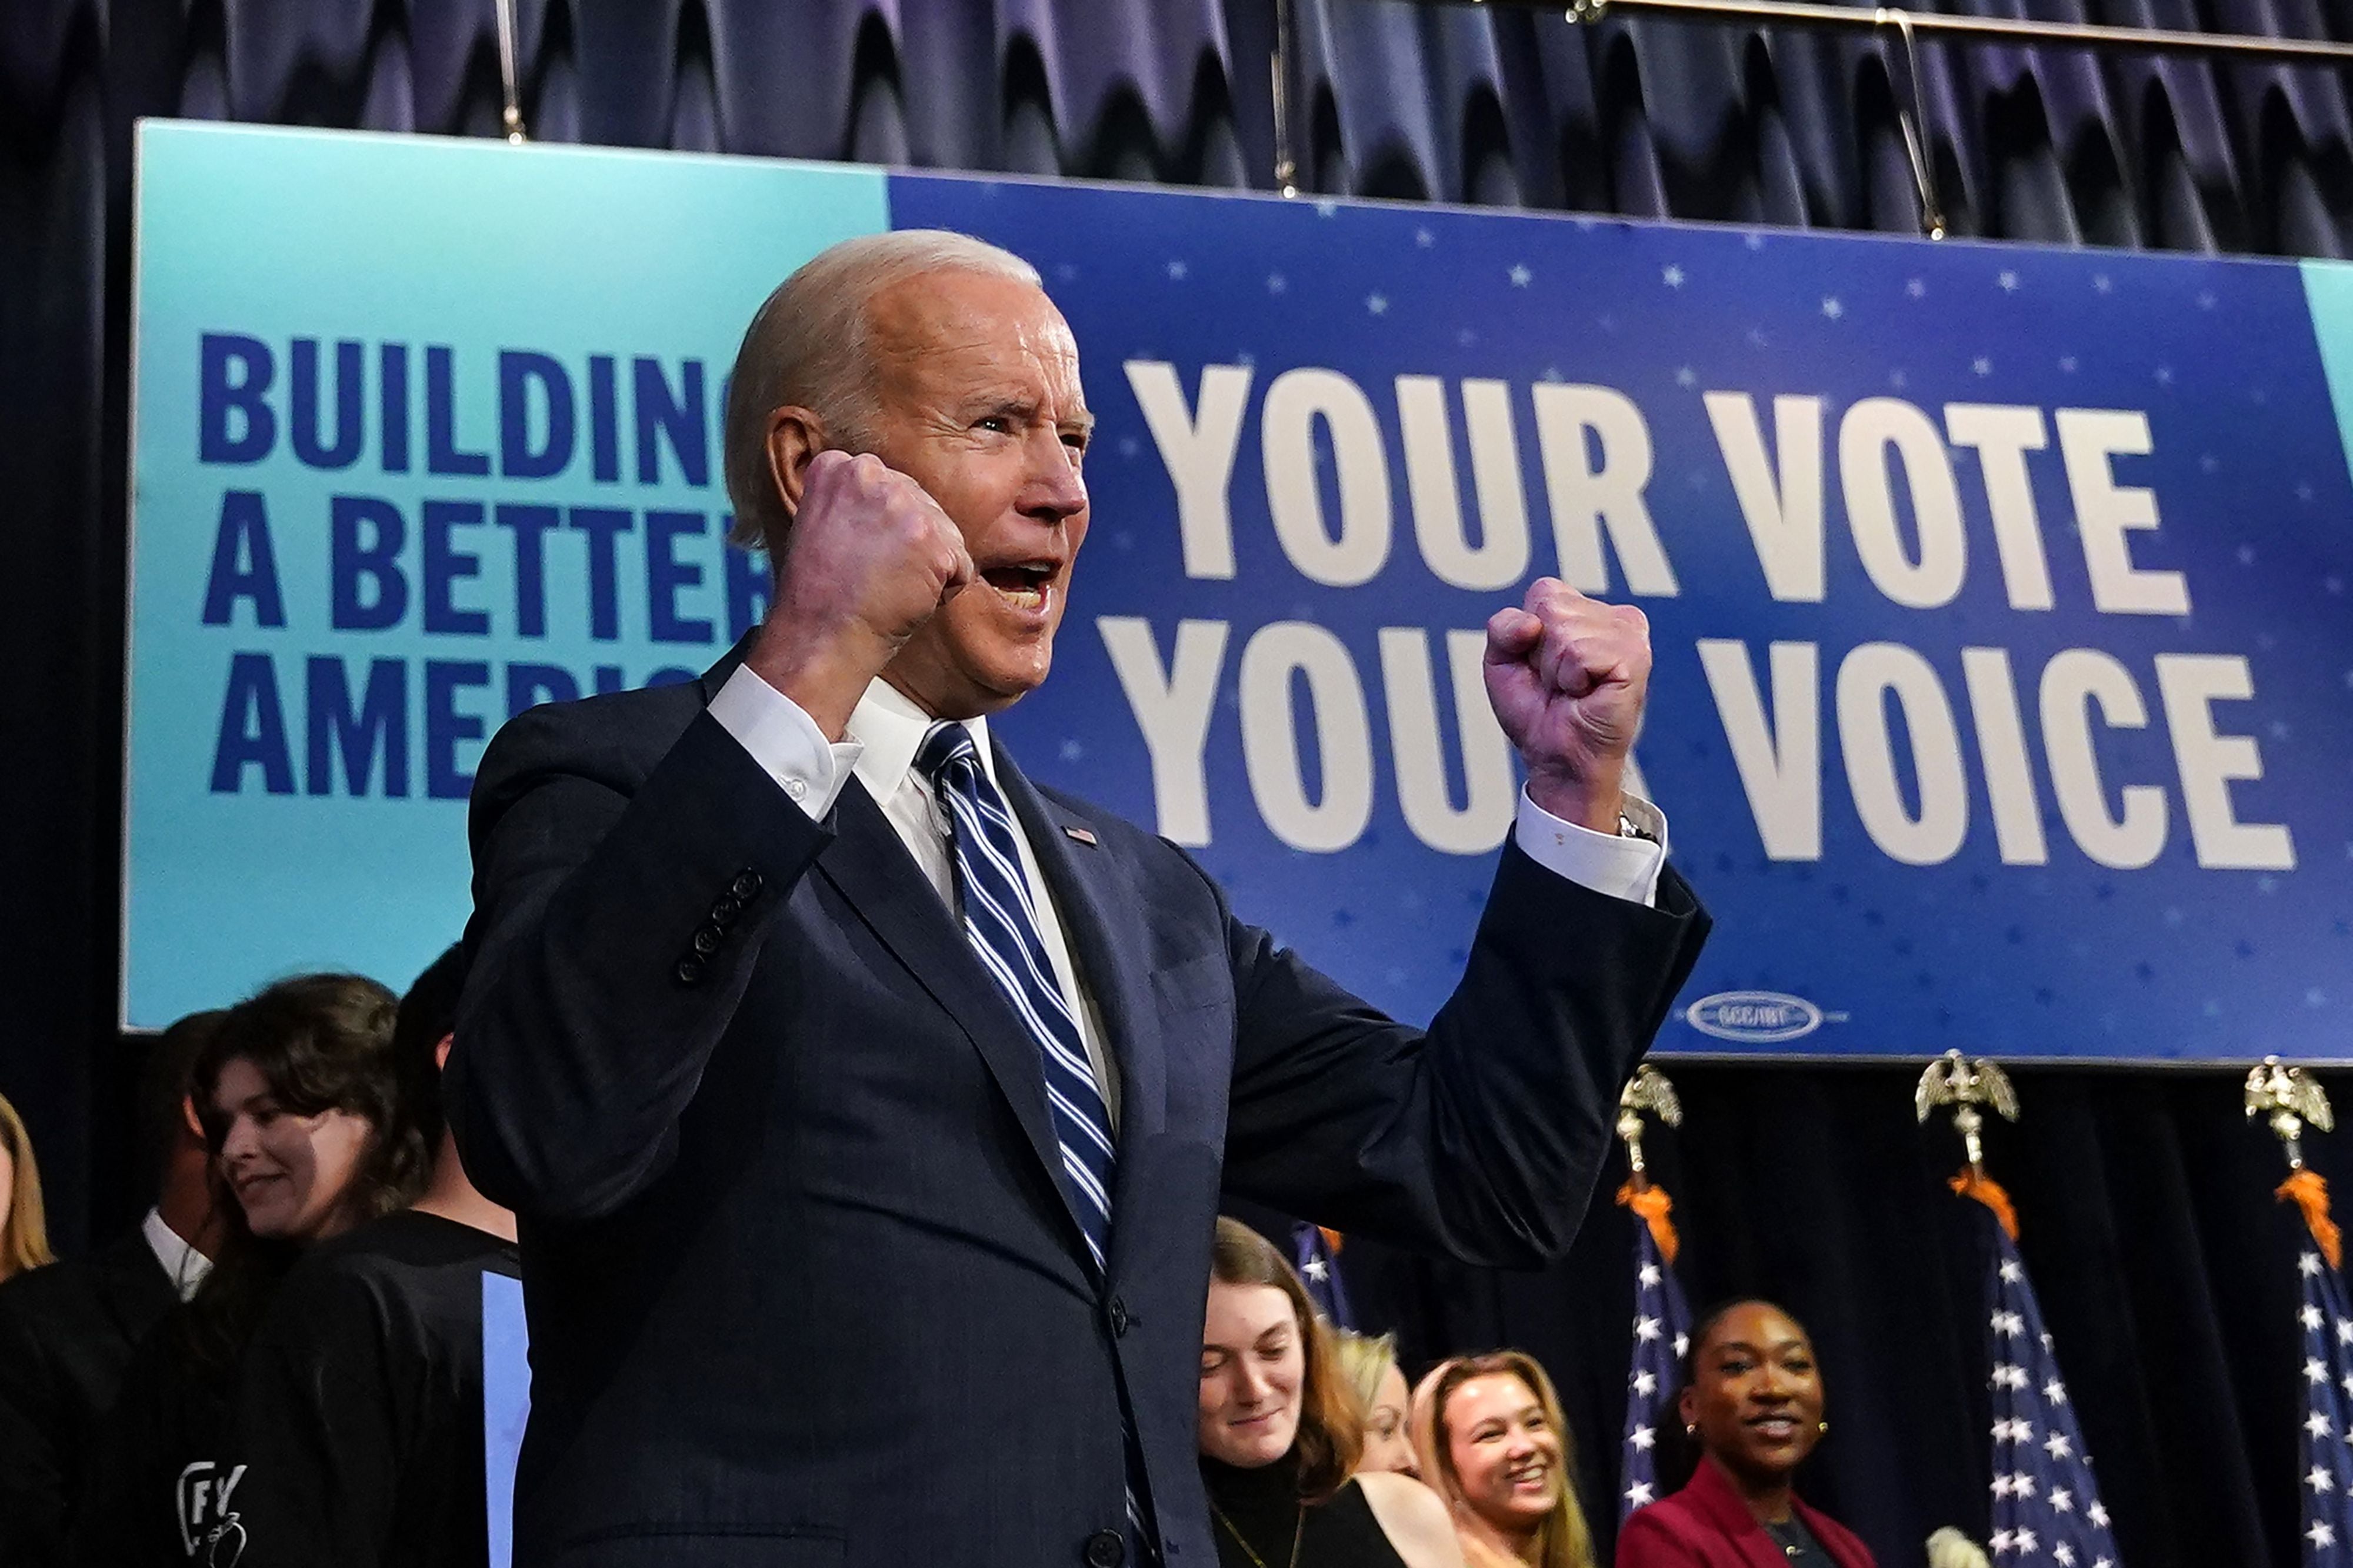 Biden has not yet confirmed that he will run for re-election in 2024, an announcement that he will make only at the beginning of next year, according to what he said. 